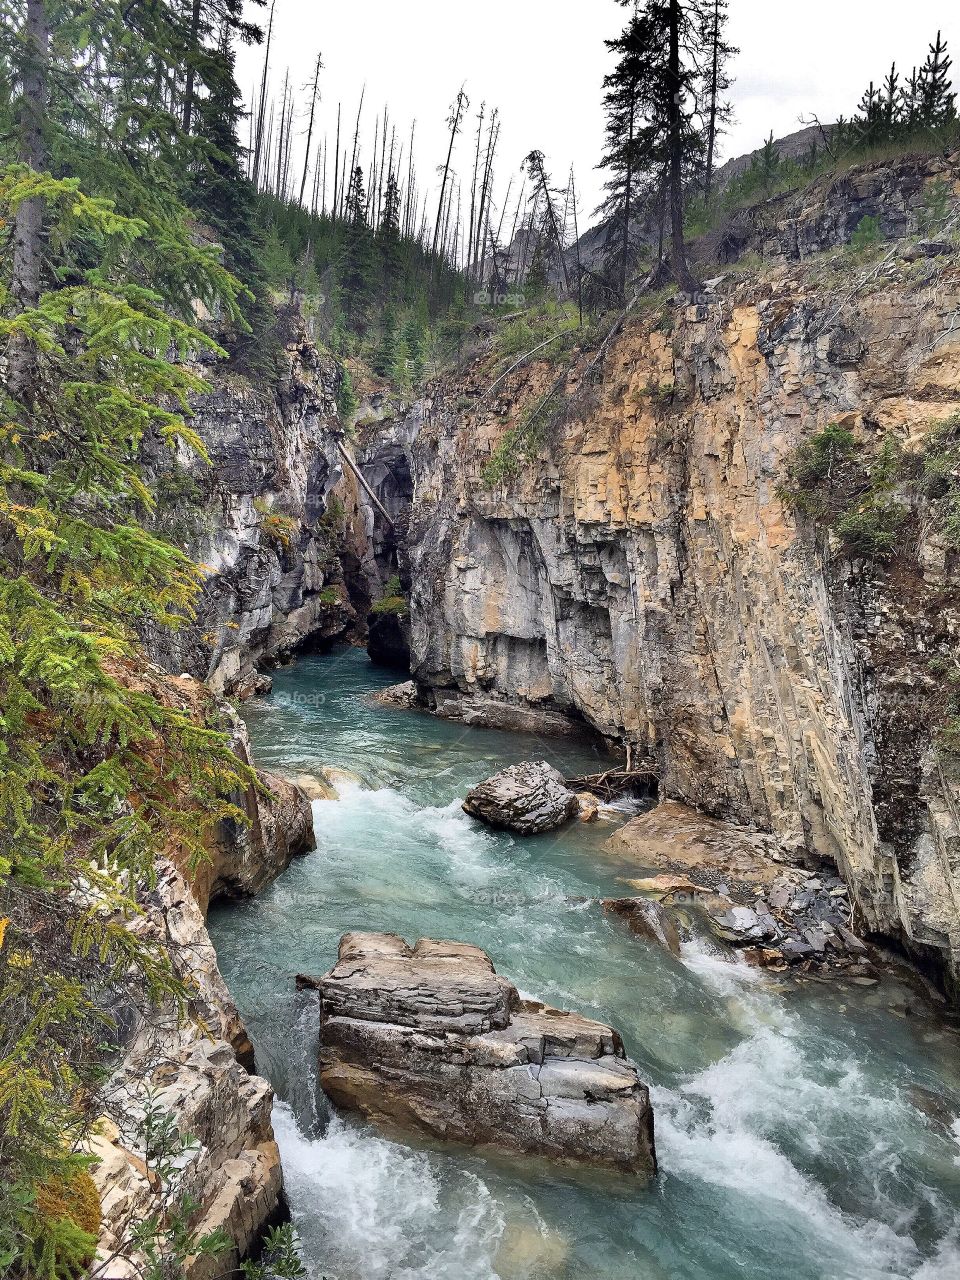 The river flows (Taken at the Kootenays, Canada)